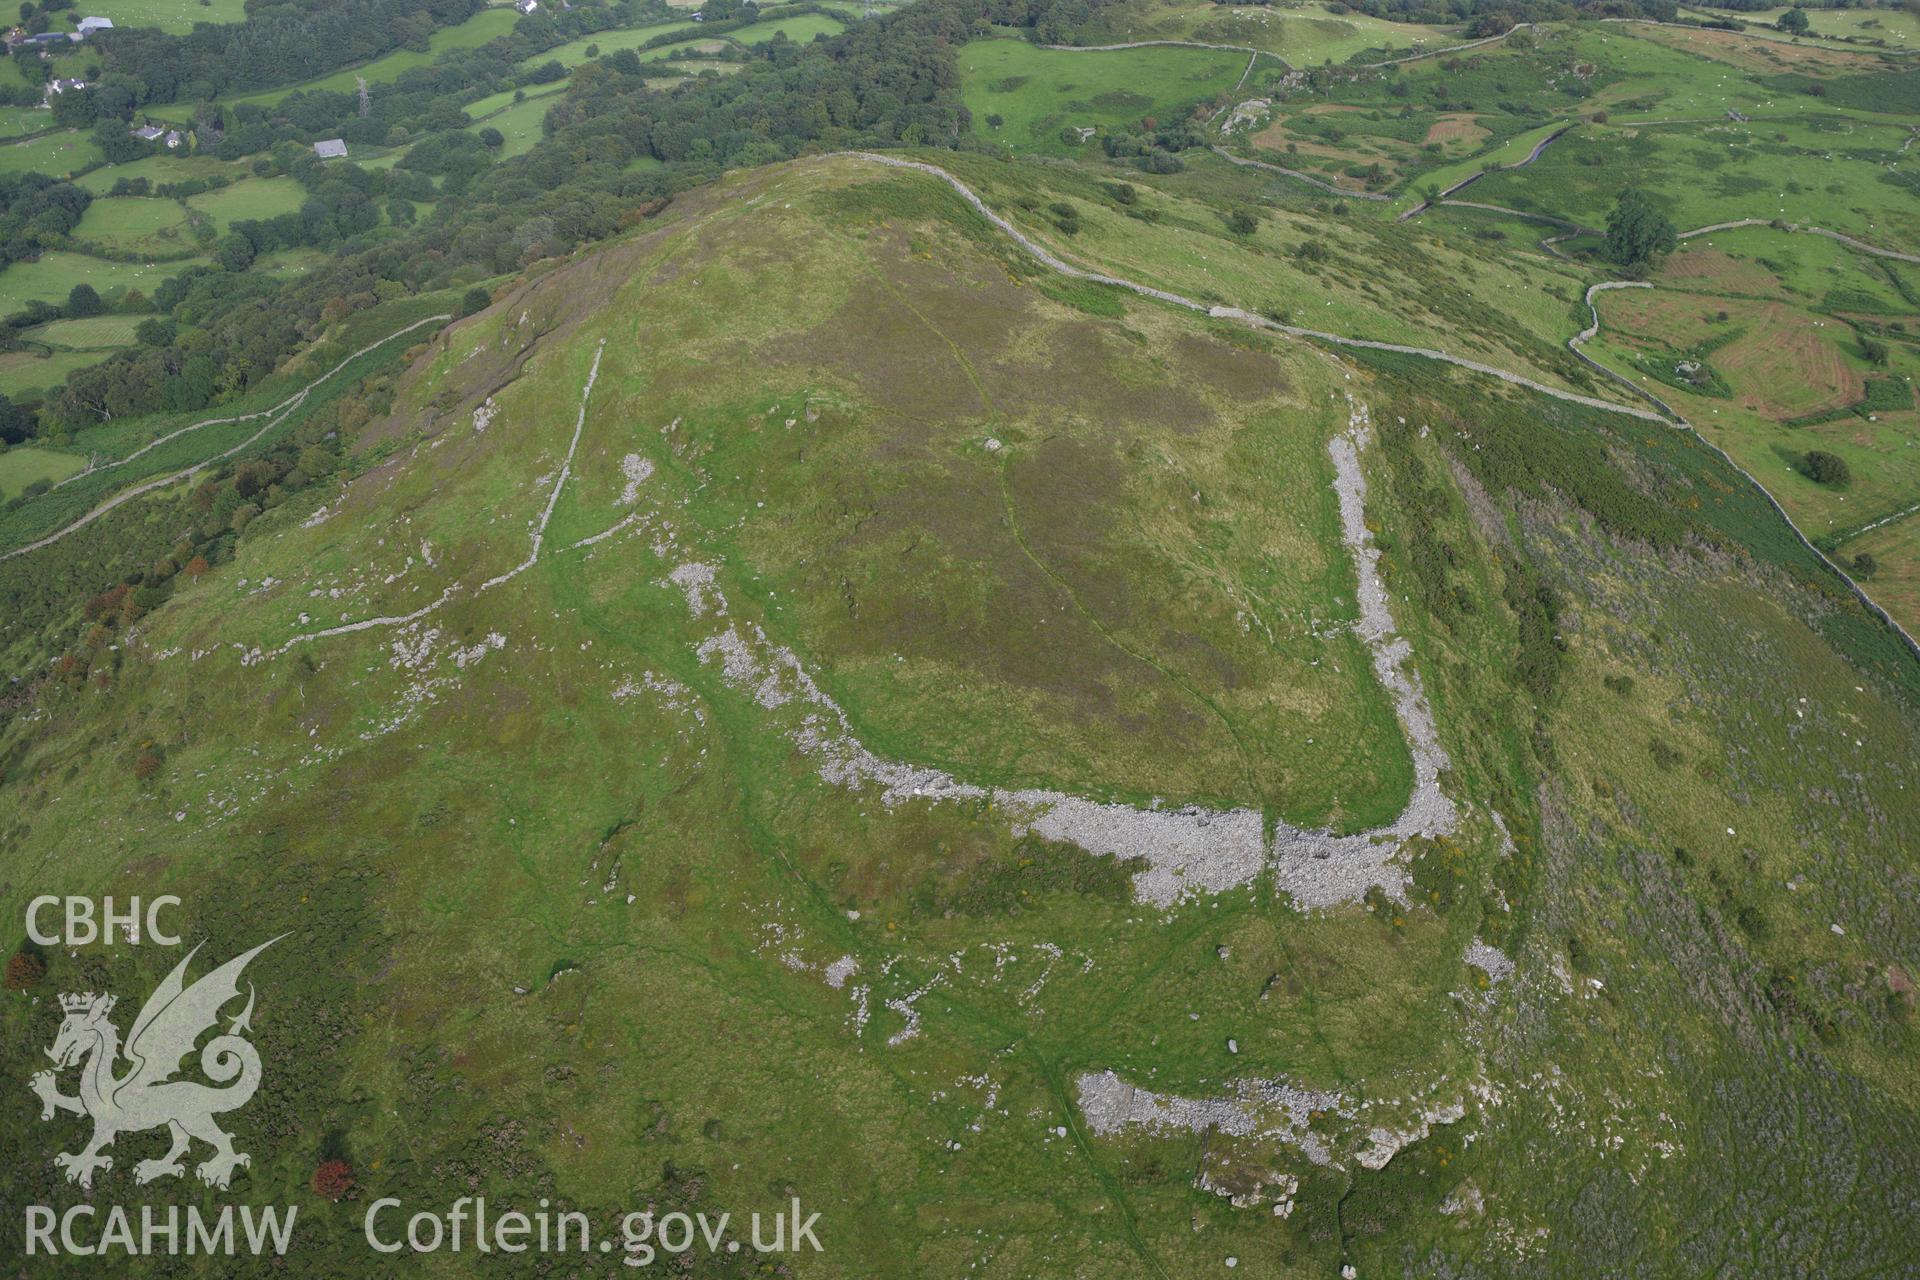 RCAHMW colour oblique aerial photograph of Pen-y-Gaer Hillfort. Taken on 06 August 2009 by Toby Driver